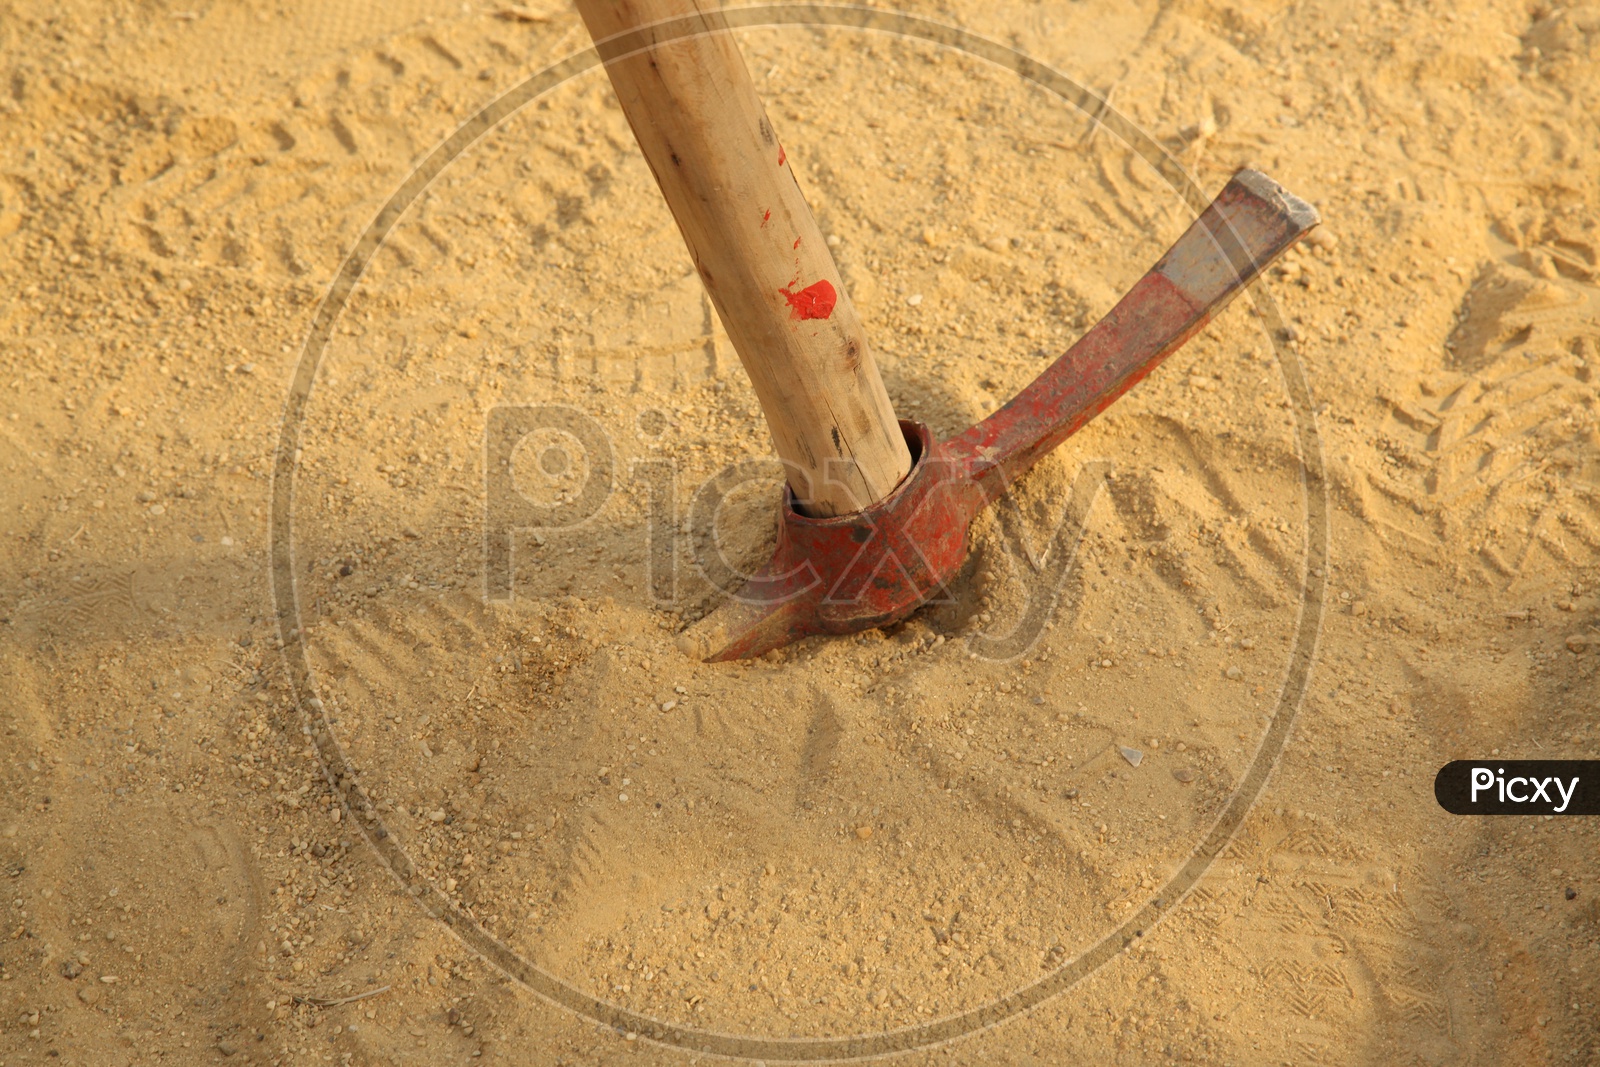 A Pickaxe in the sand